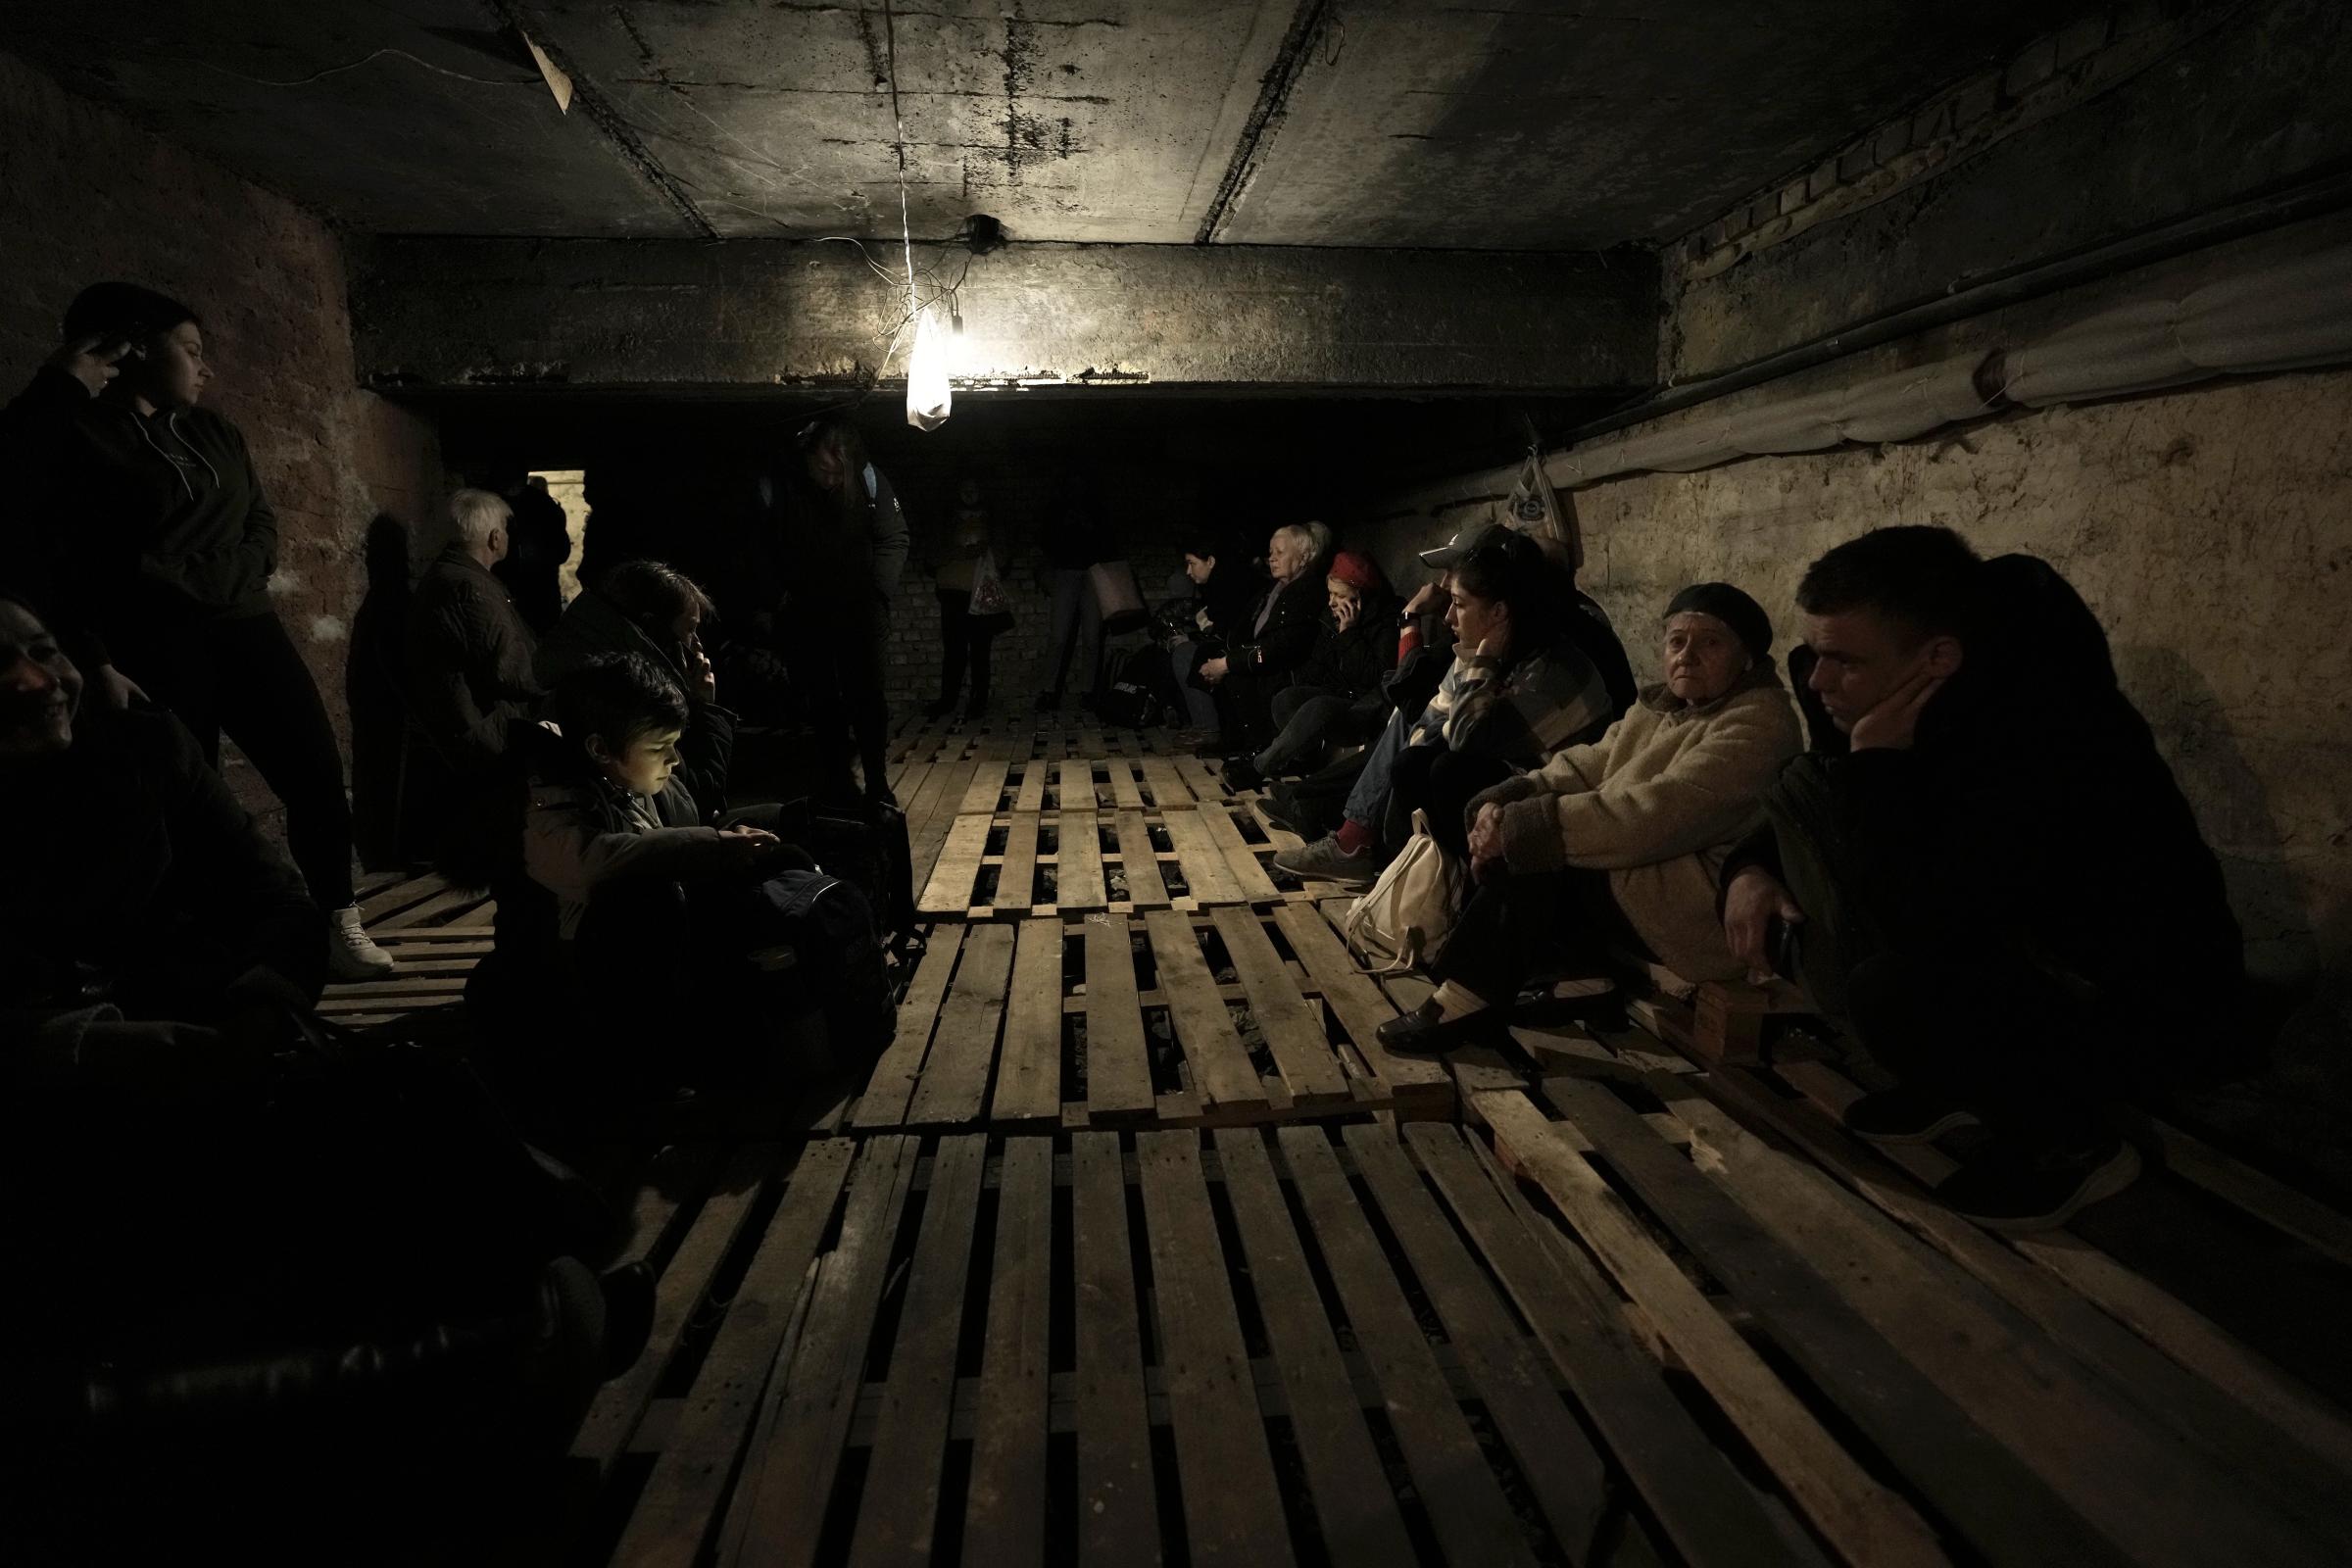  People shelter underground following explosions. 